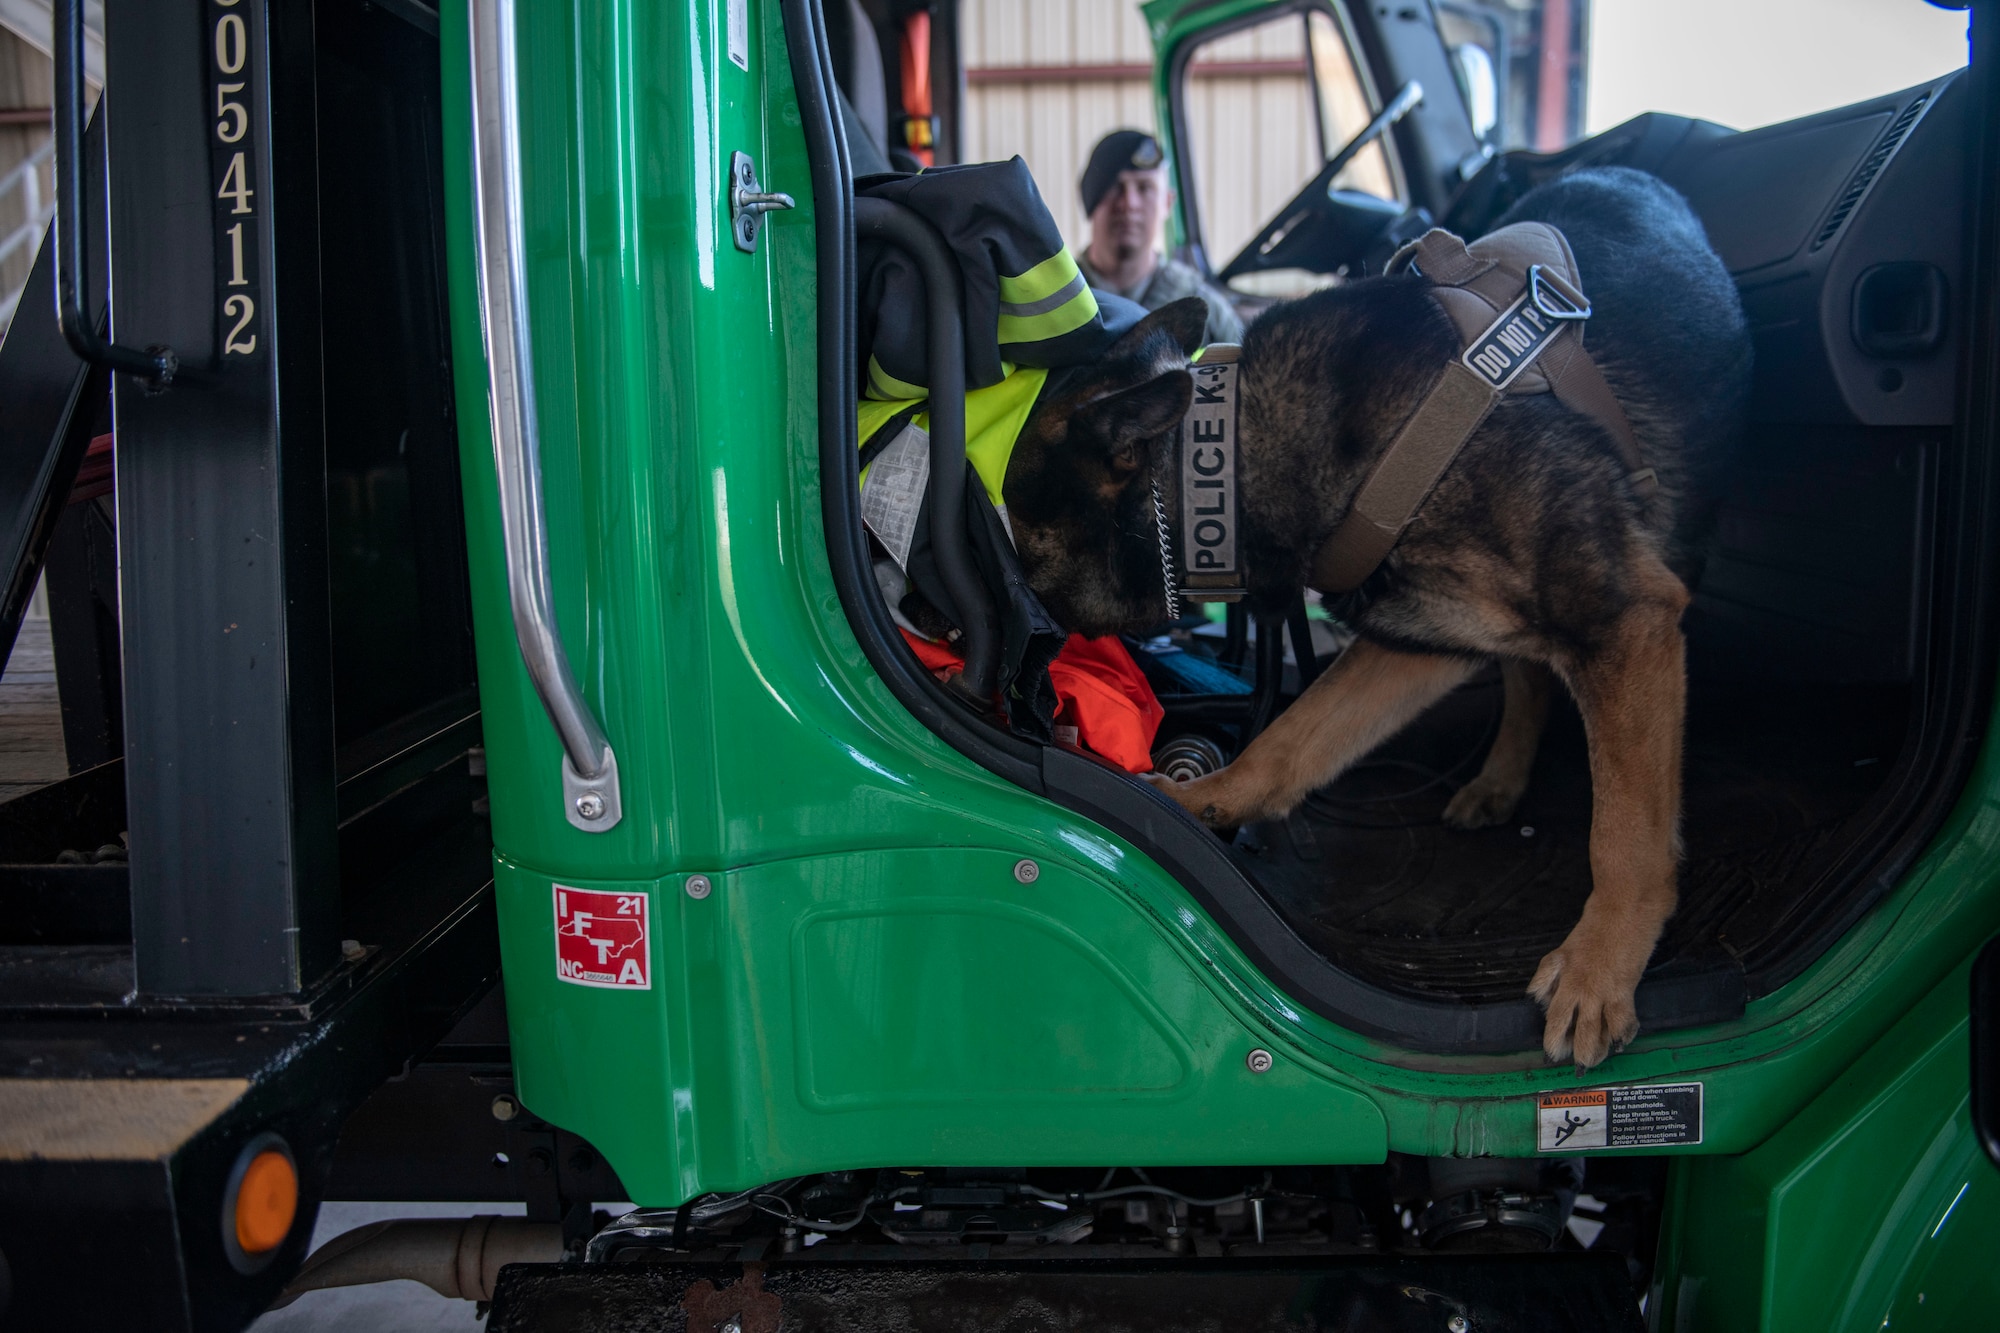 Staff Sgt. Jason Herrier, 9th Security Forces Squadron (SFS) military working dog (MWD) handler observes Bady 2, 9th SFS MWD as he finds a training aide placed in a vehicle on Beale Air Force Base.